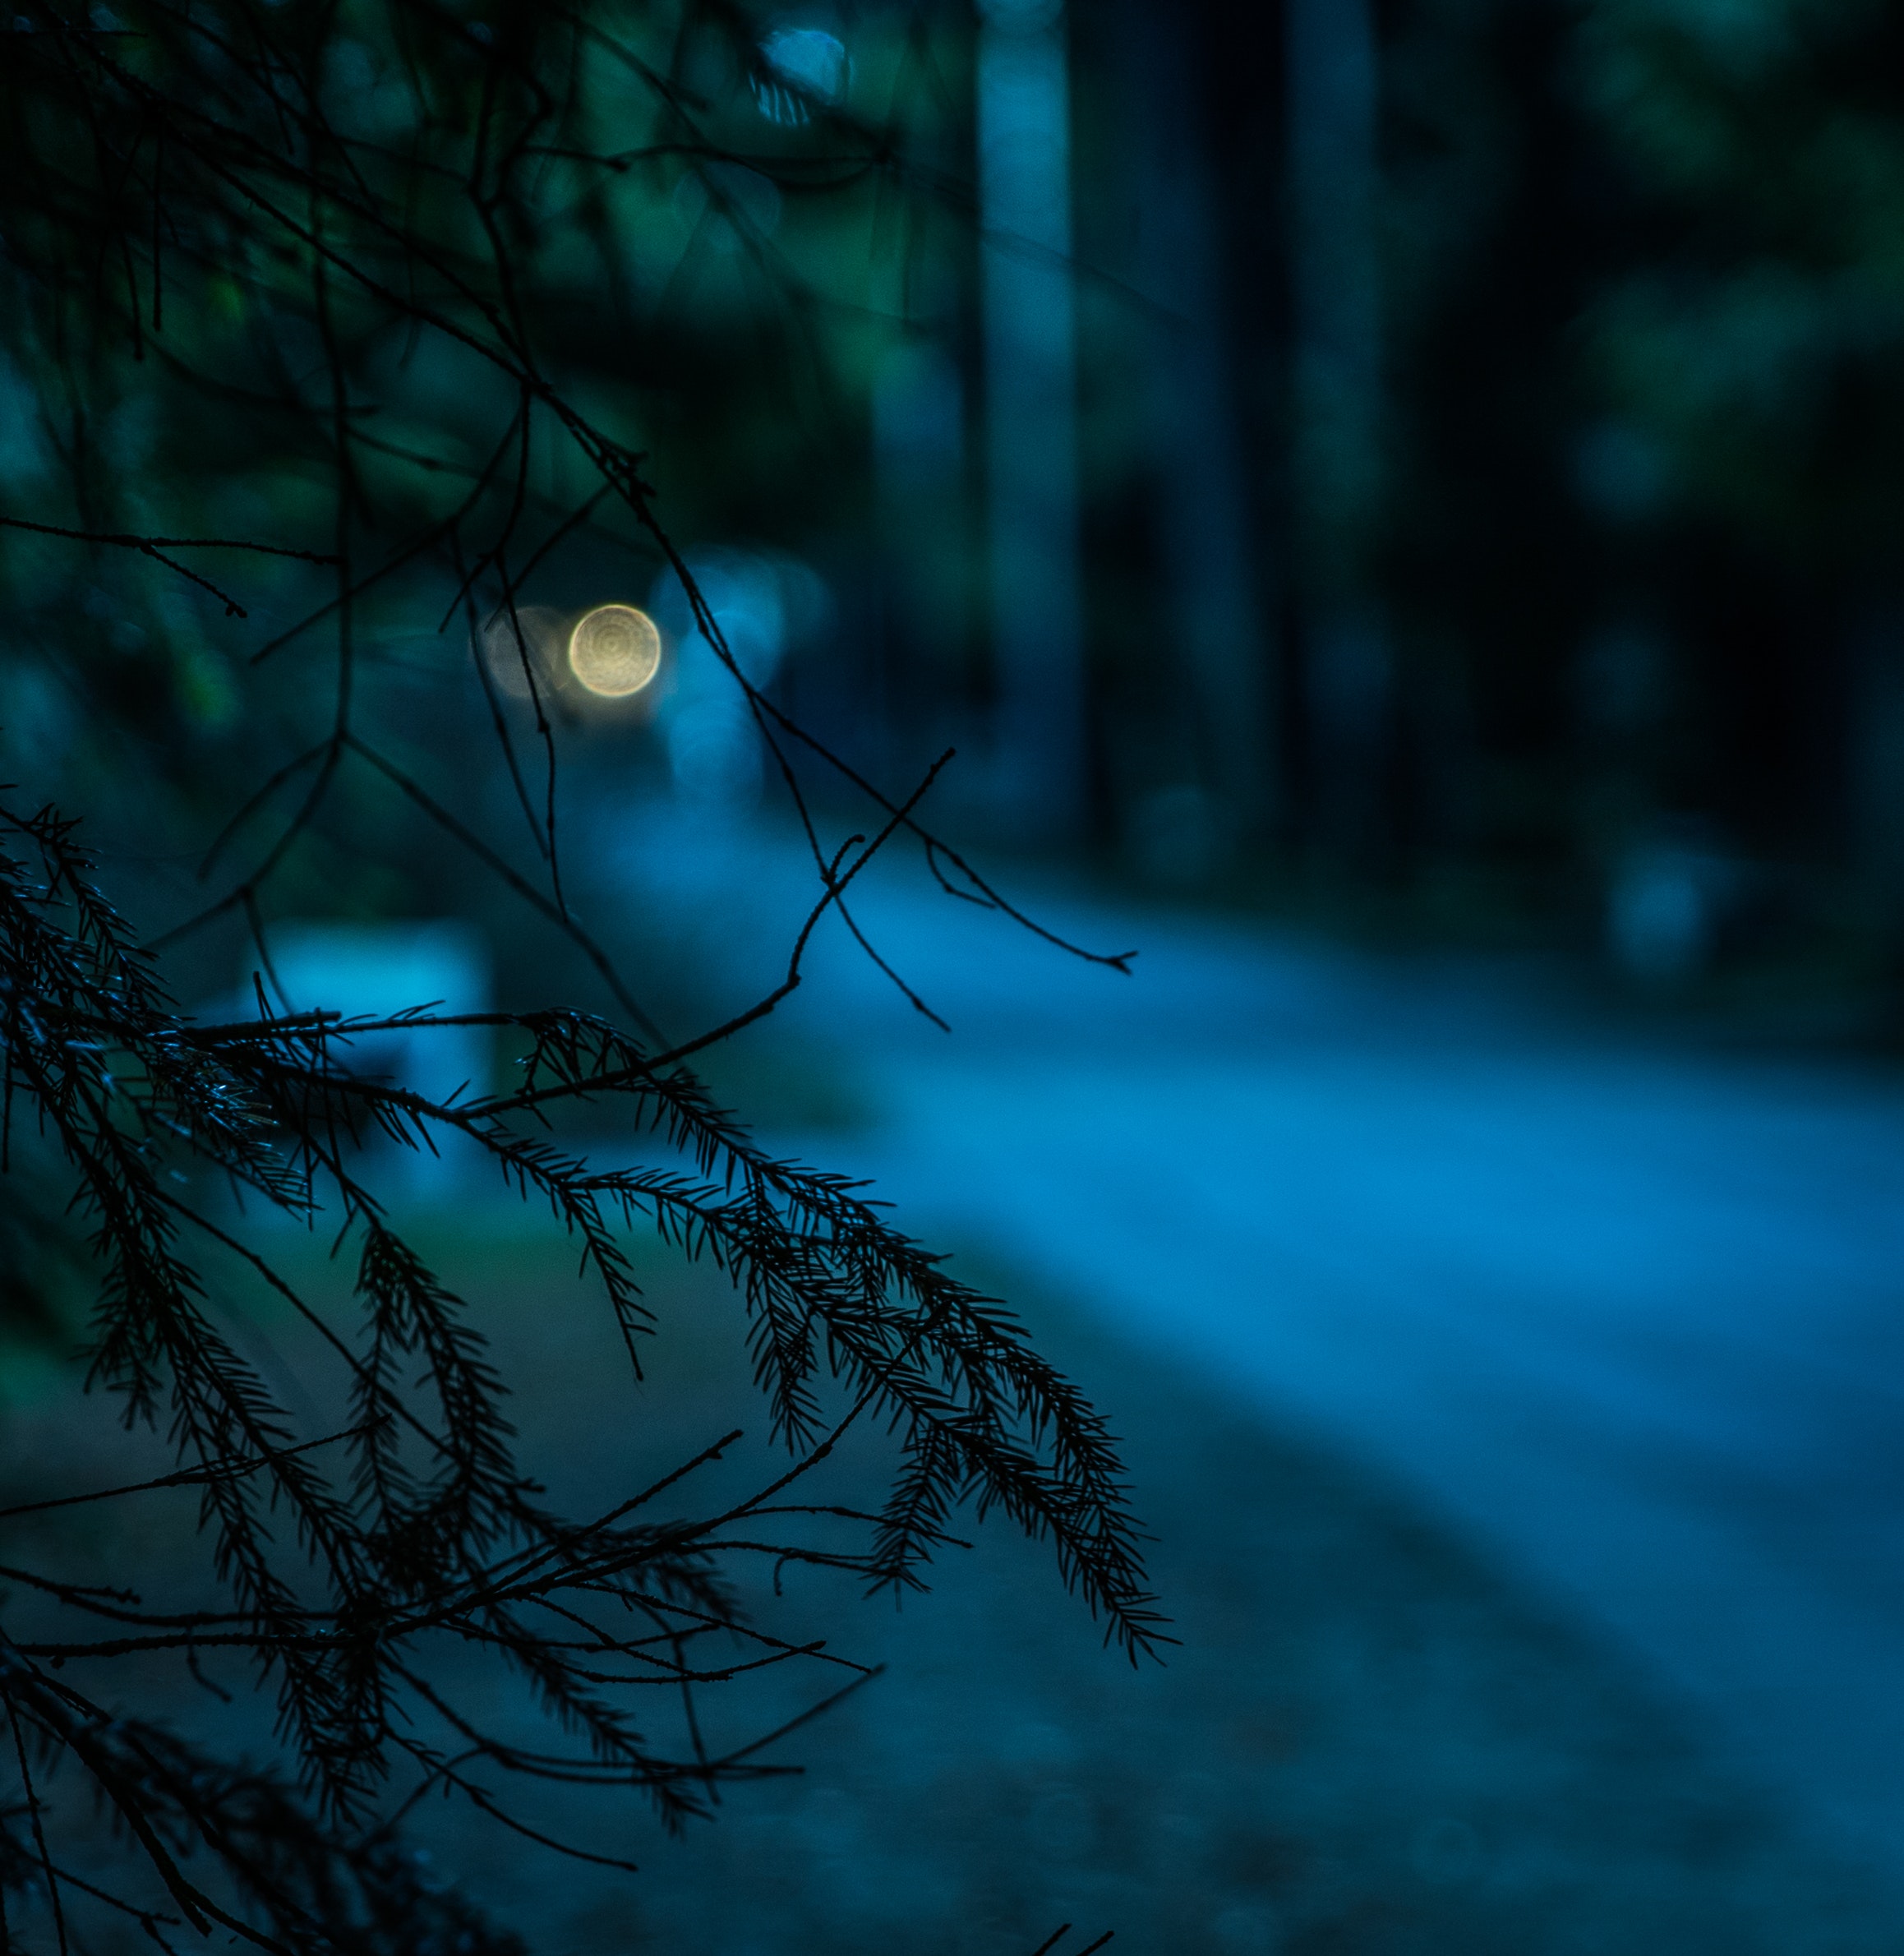 Night Time Walks in the Woods